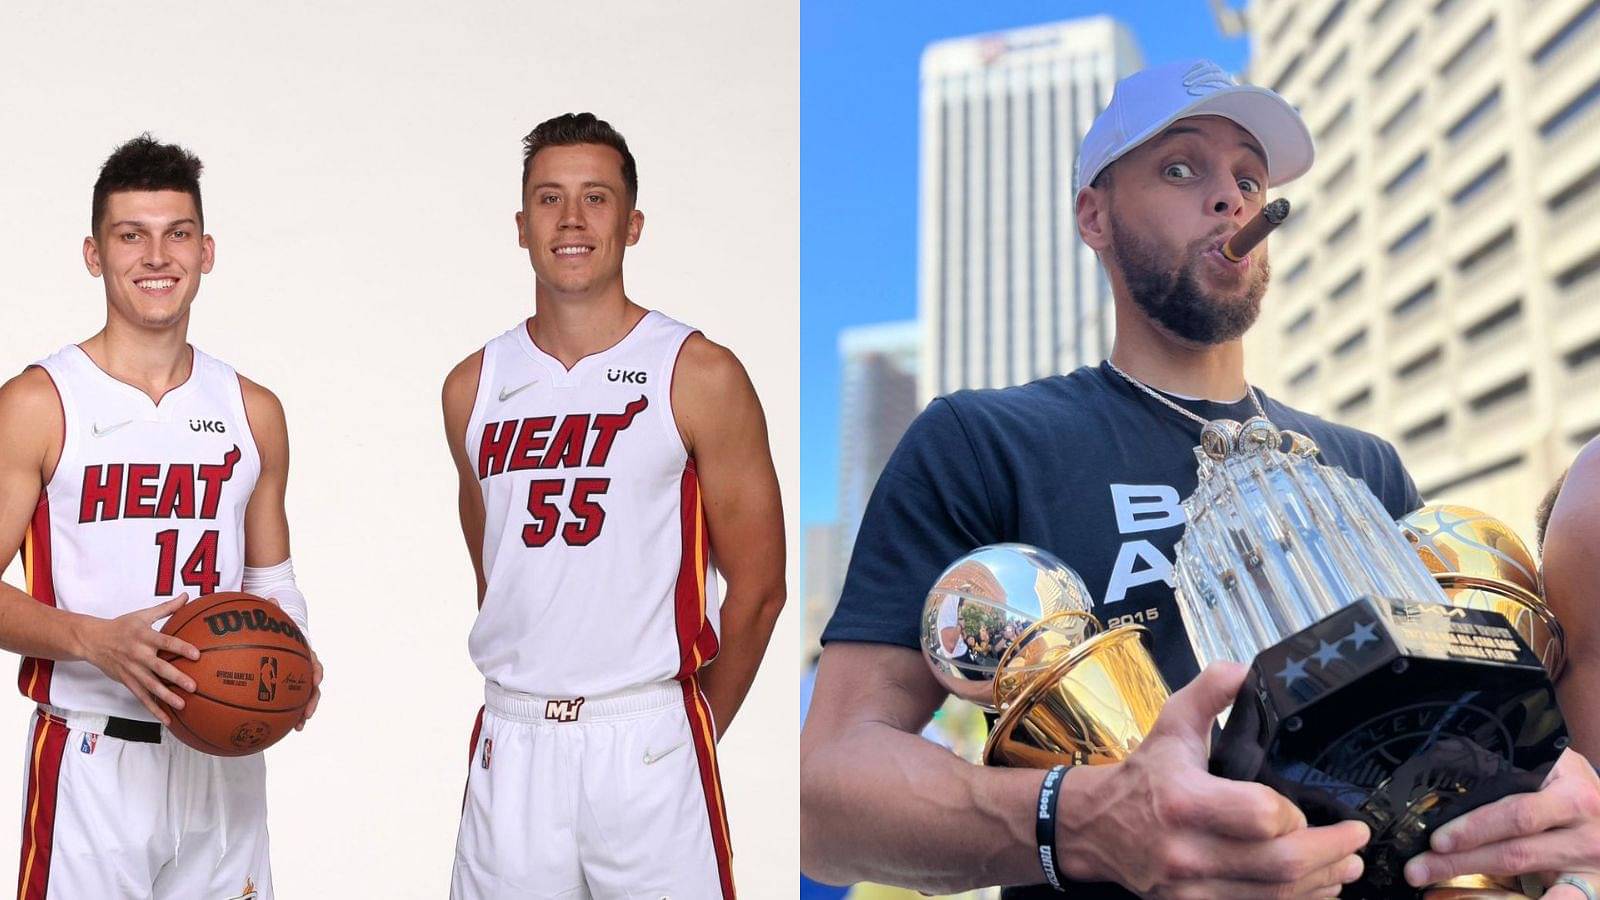 Duncan Robinson was paid $63,000 for each three pointer made last season, that is $21,000 per point, which is what Stephen Curry cost the Warriors